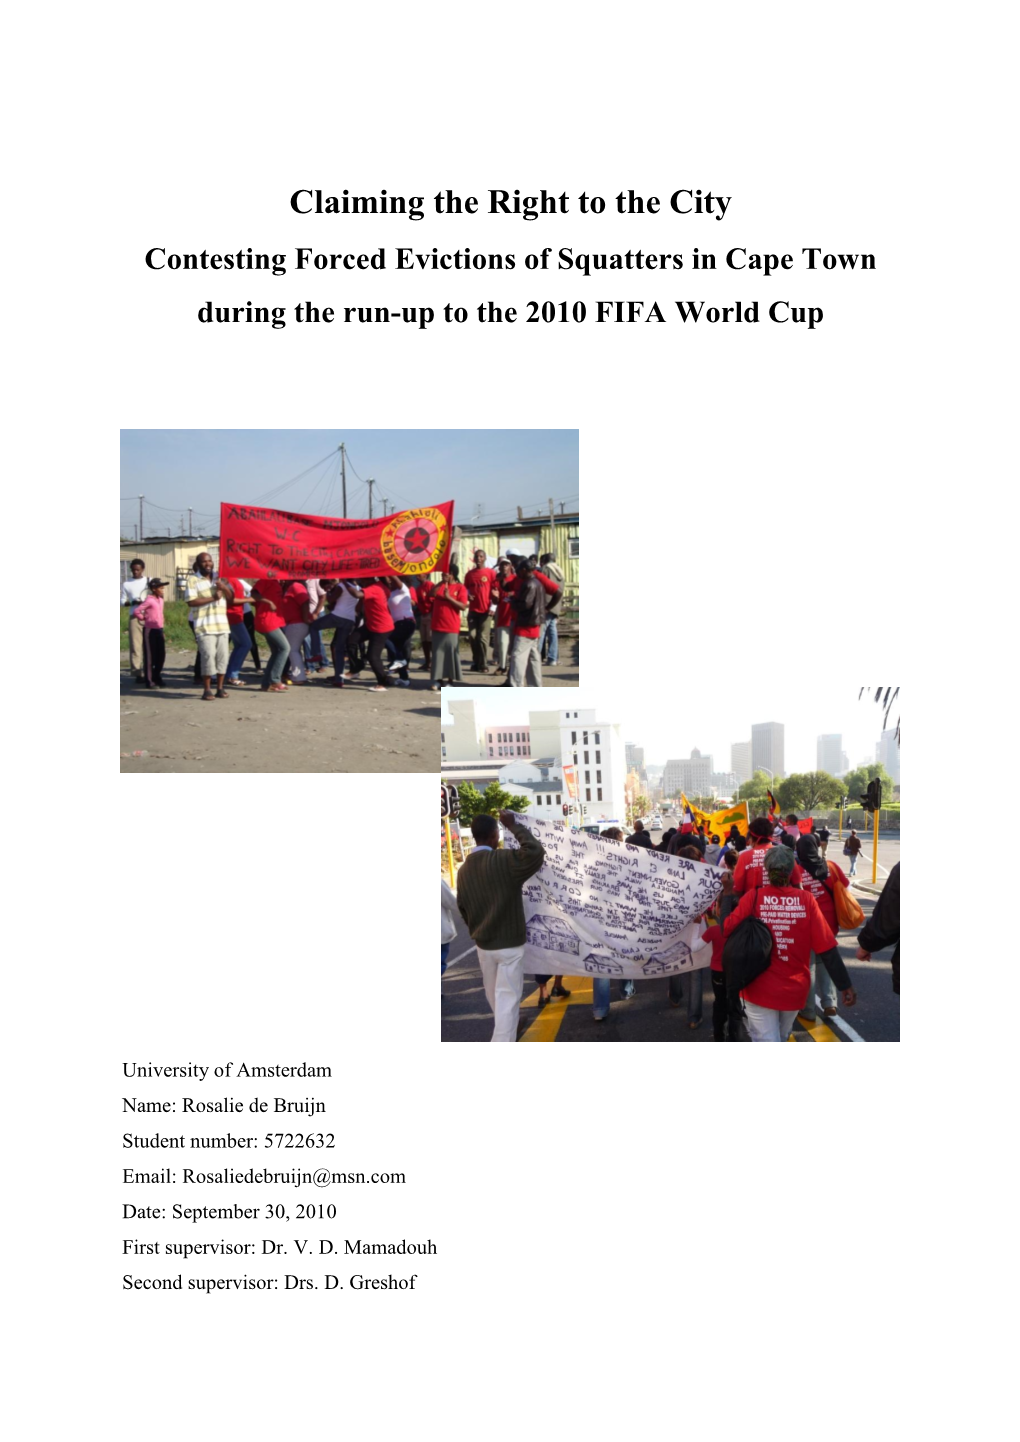 Claiming the Right to the City Contesting Forced Evictions of Squatters in Cape Town During the Run-Up to the 2010 FIFA World Cup